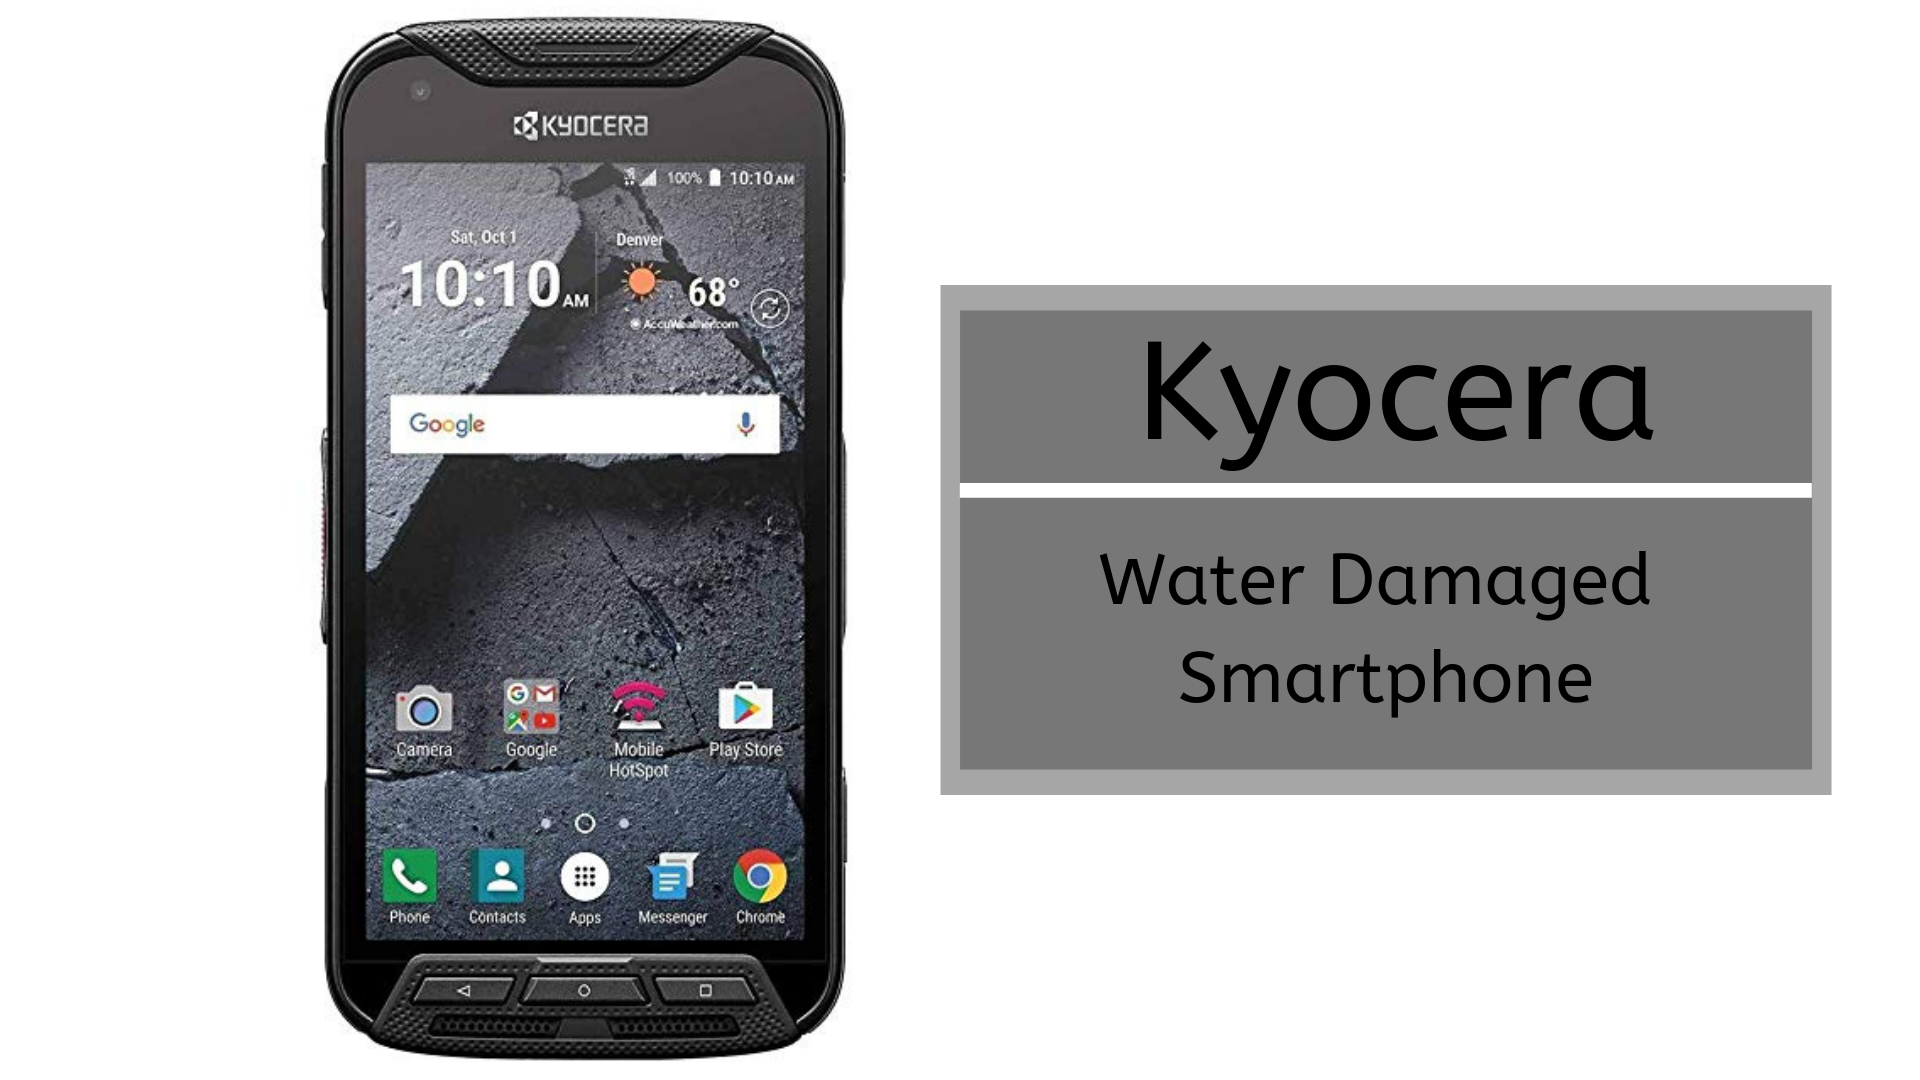 How To Fix Kyocera Water Damaged Smartphone [Quick Guide]